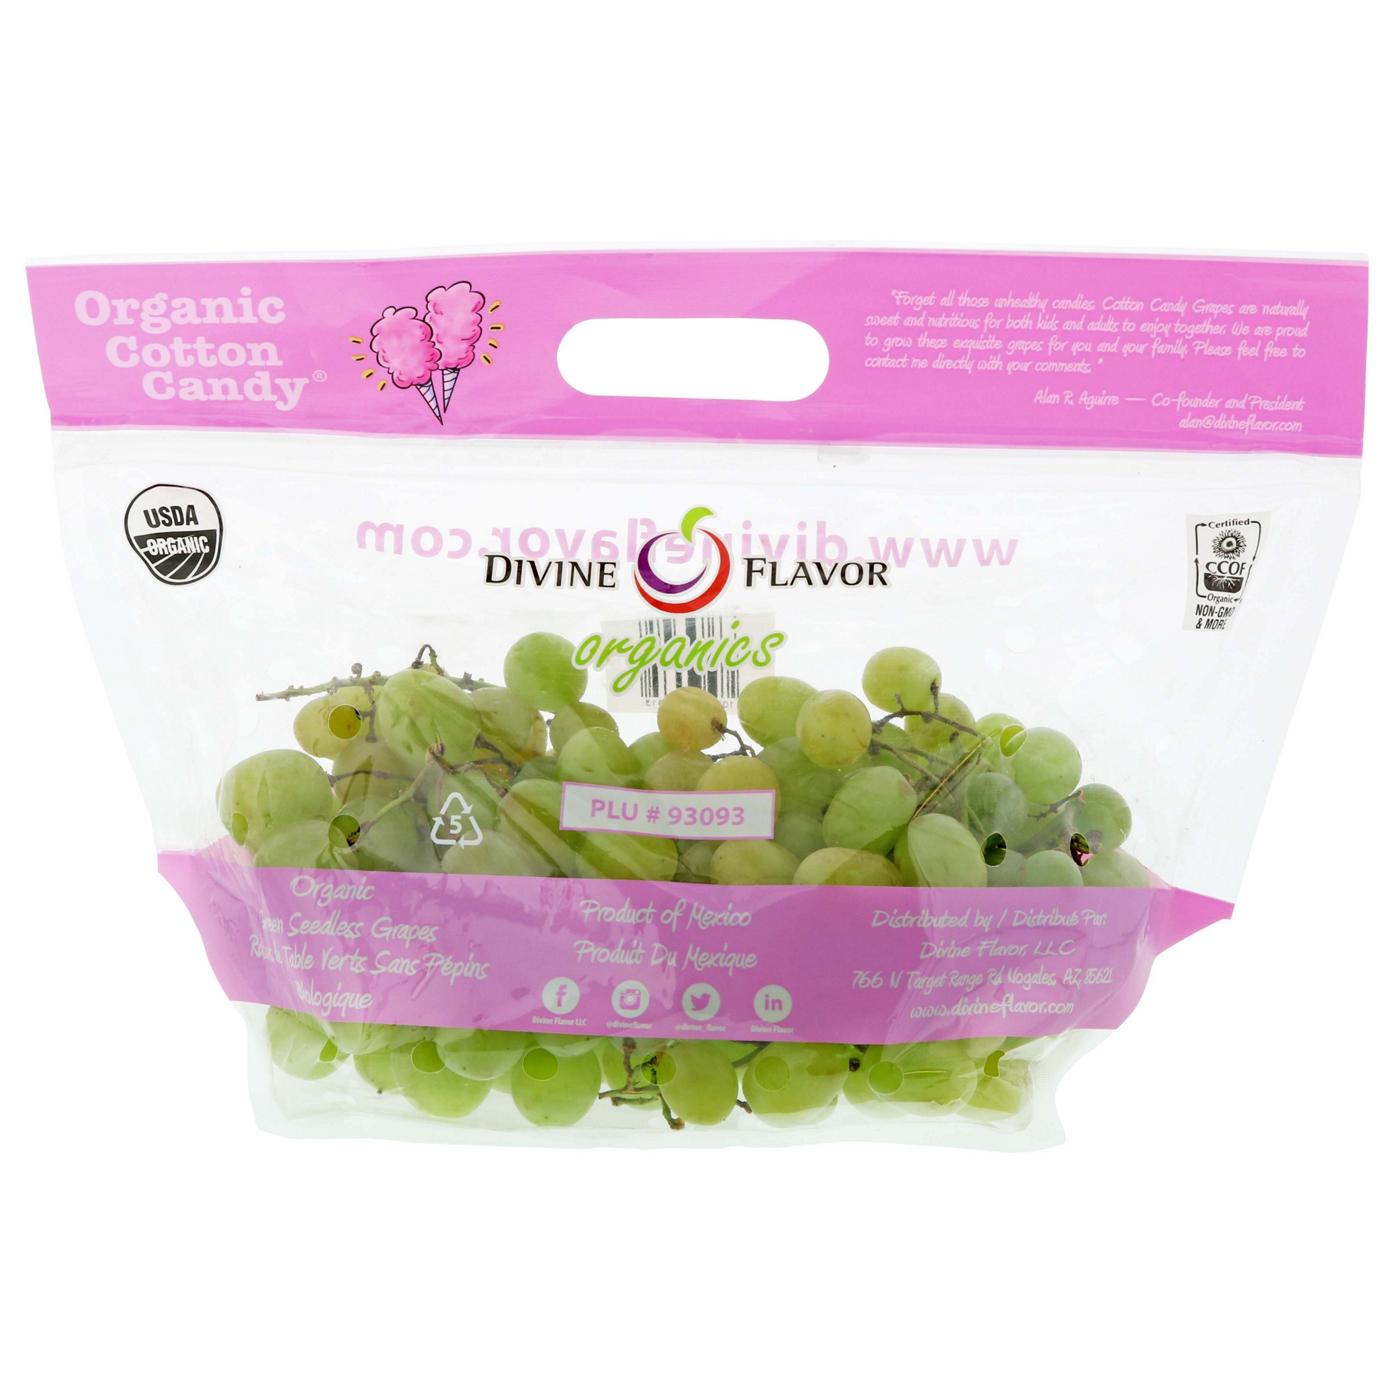 Fresh Organic Cotton Candy Grapes; image 1 of 2